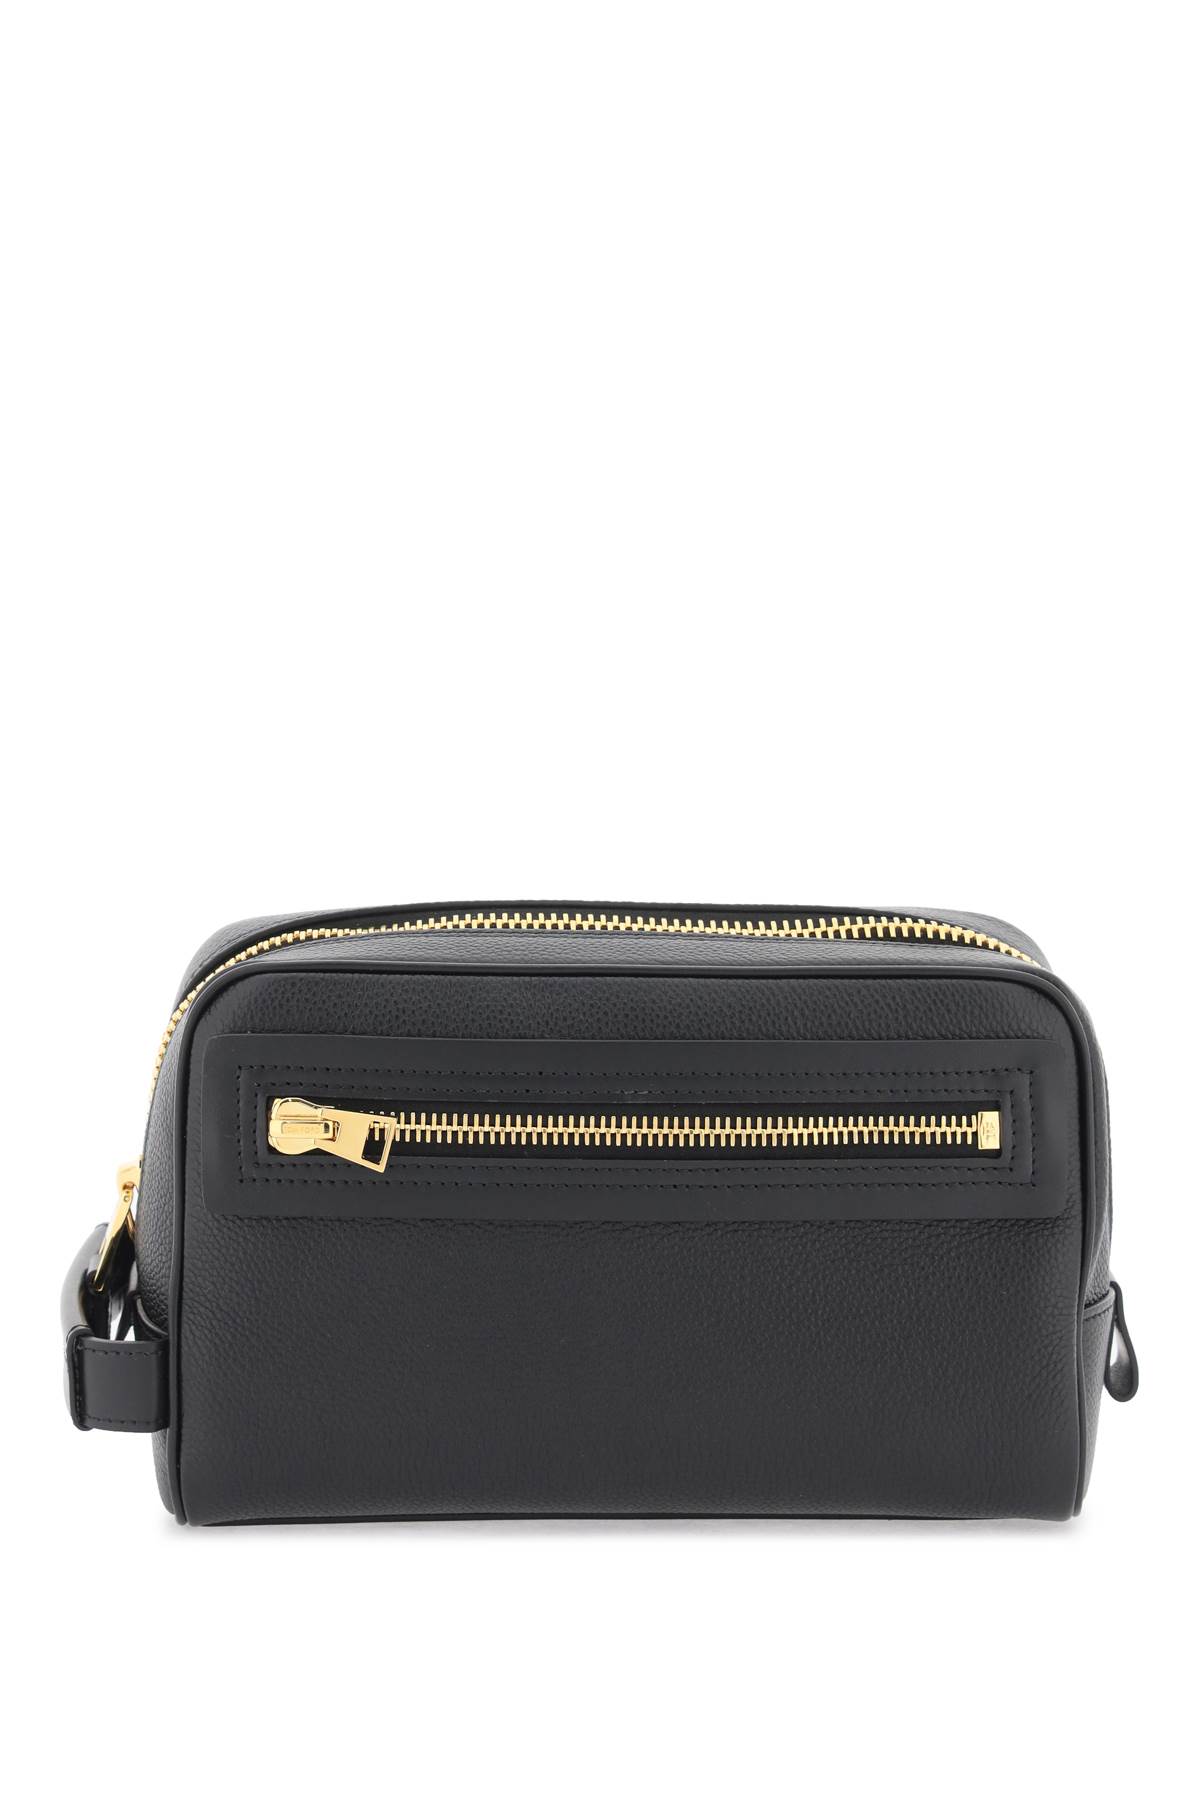 TOM FORD LEATHER VANITY CASE